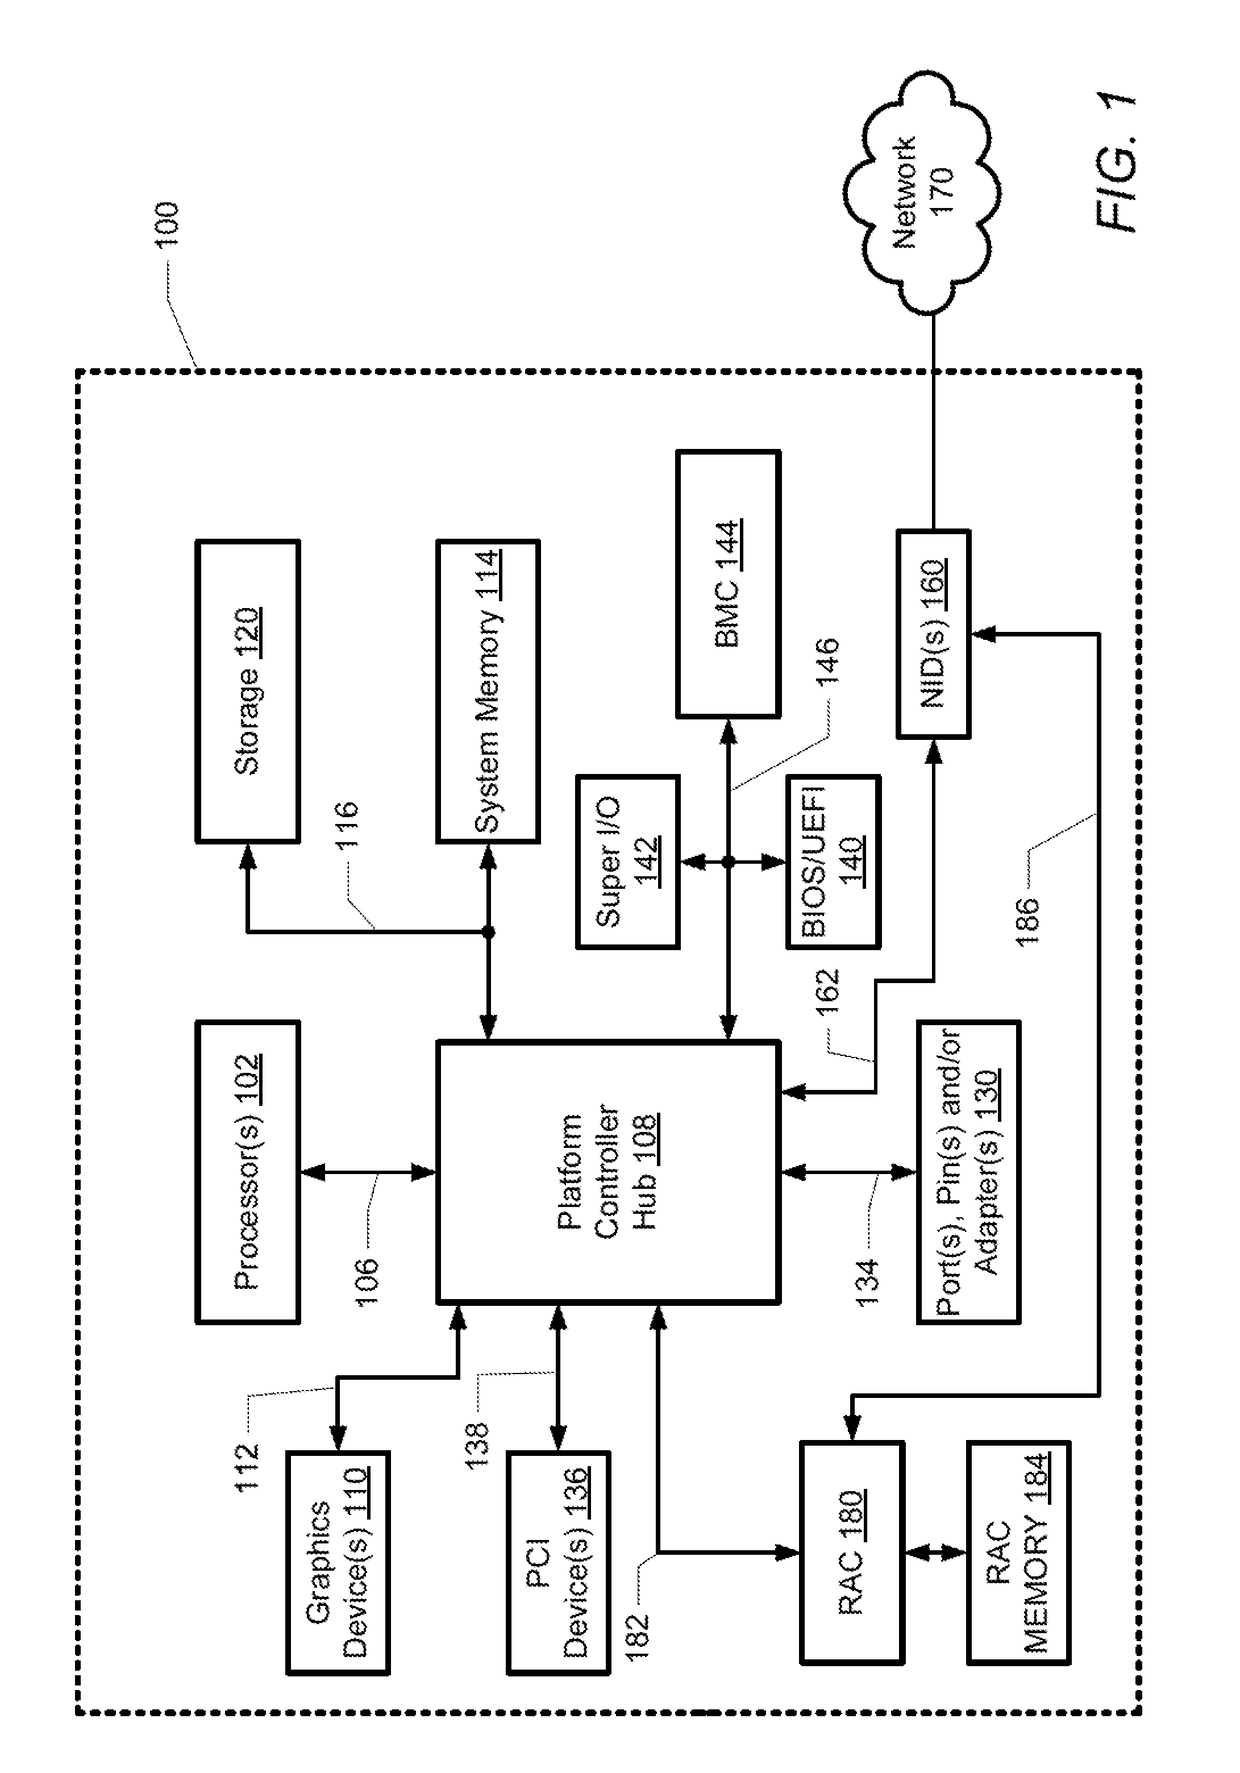 System and method for determining a master remote access controller in an information handling system